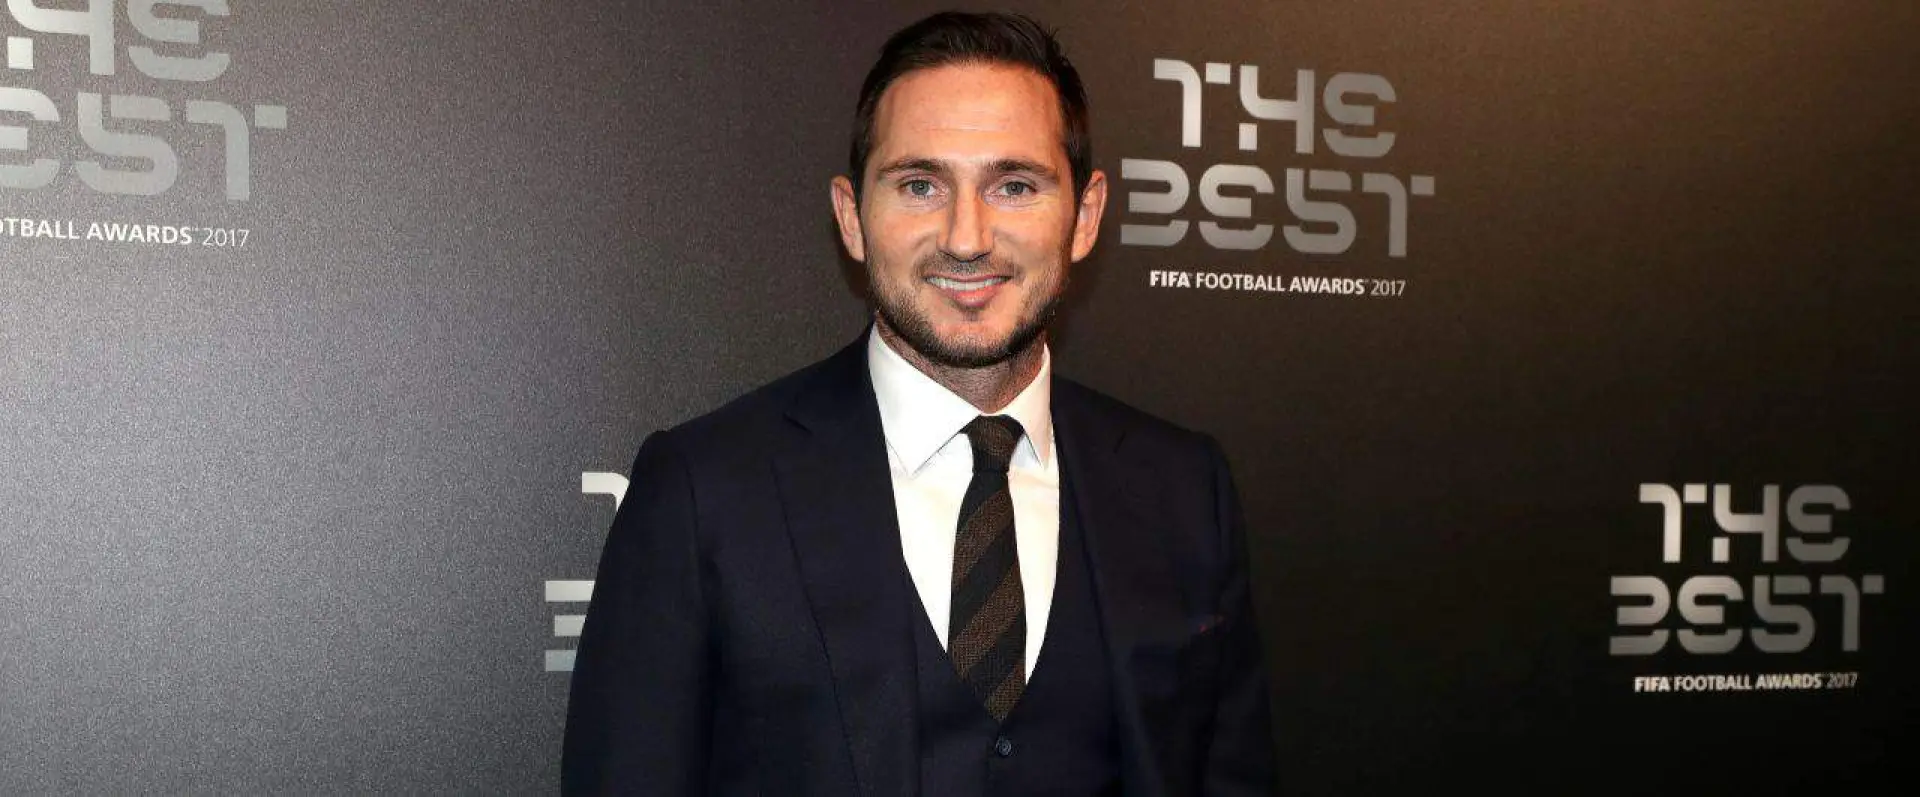 Frank Lampard Derby County manager